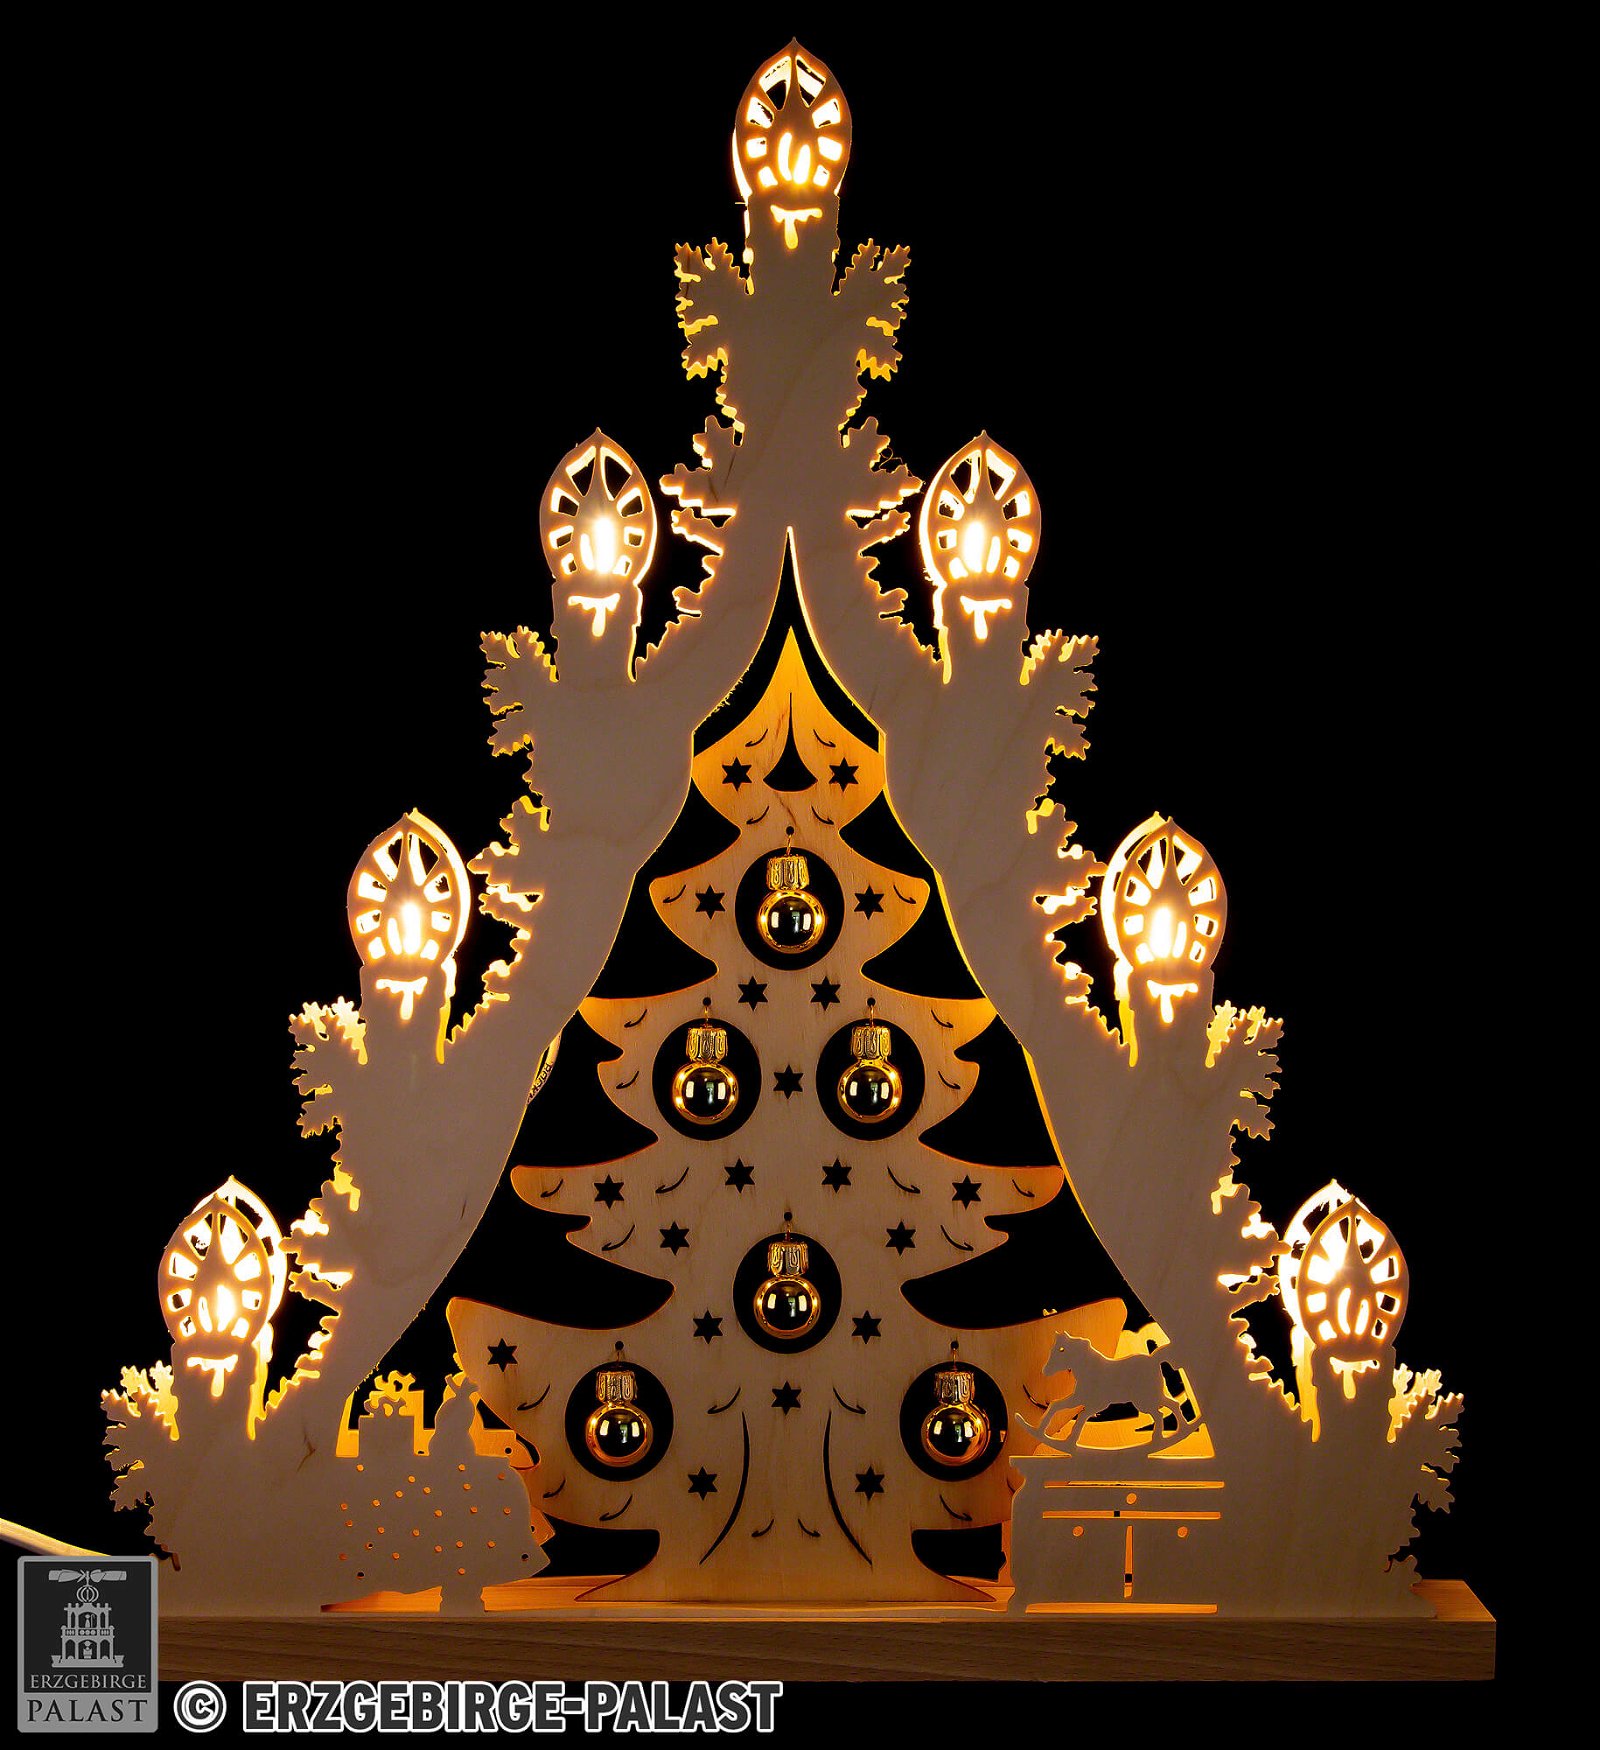 by cm/15×17.3in) Baubles” Golden Tree (38×44 Holzkunst Weigla with “Christmas Triangle Light